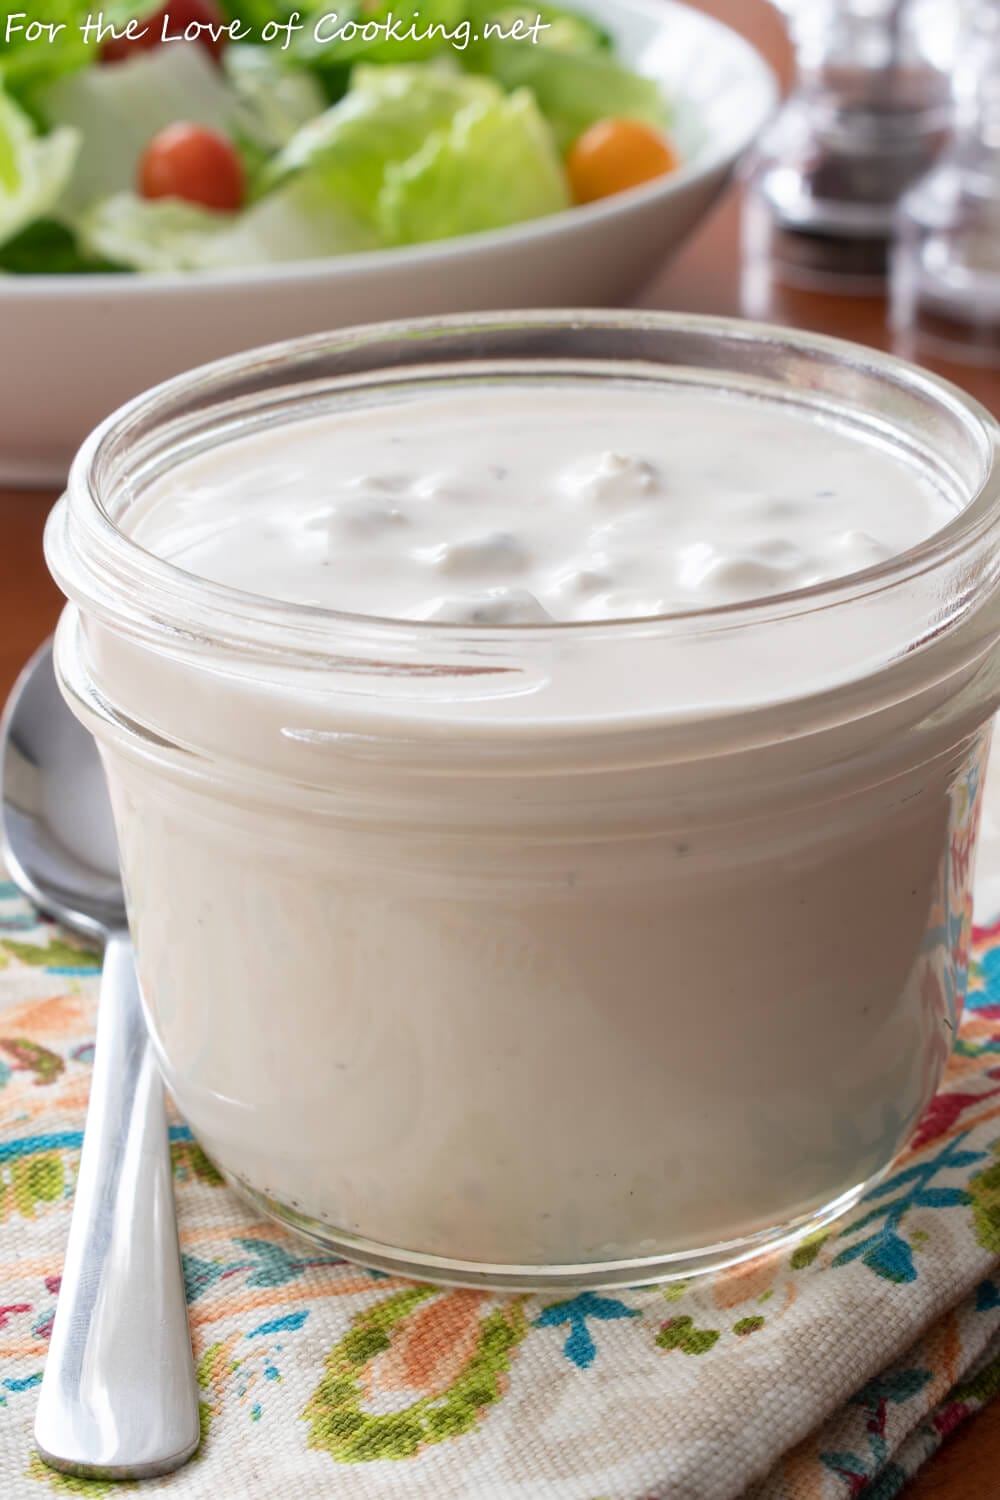 blue cheese dressing